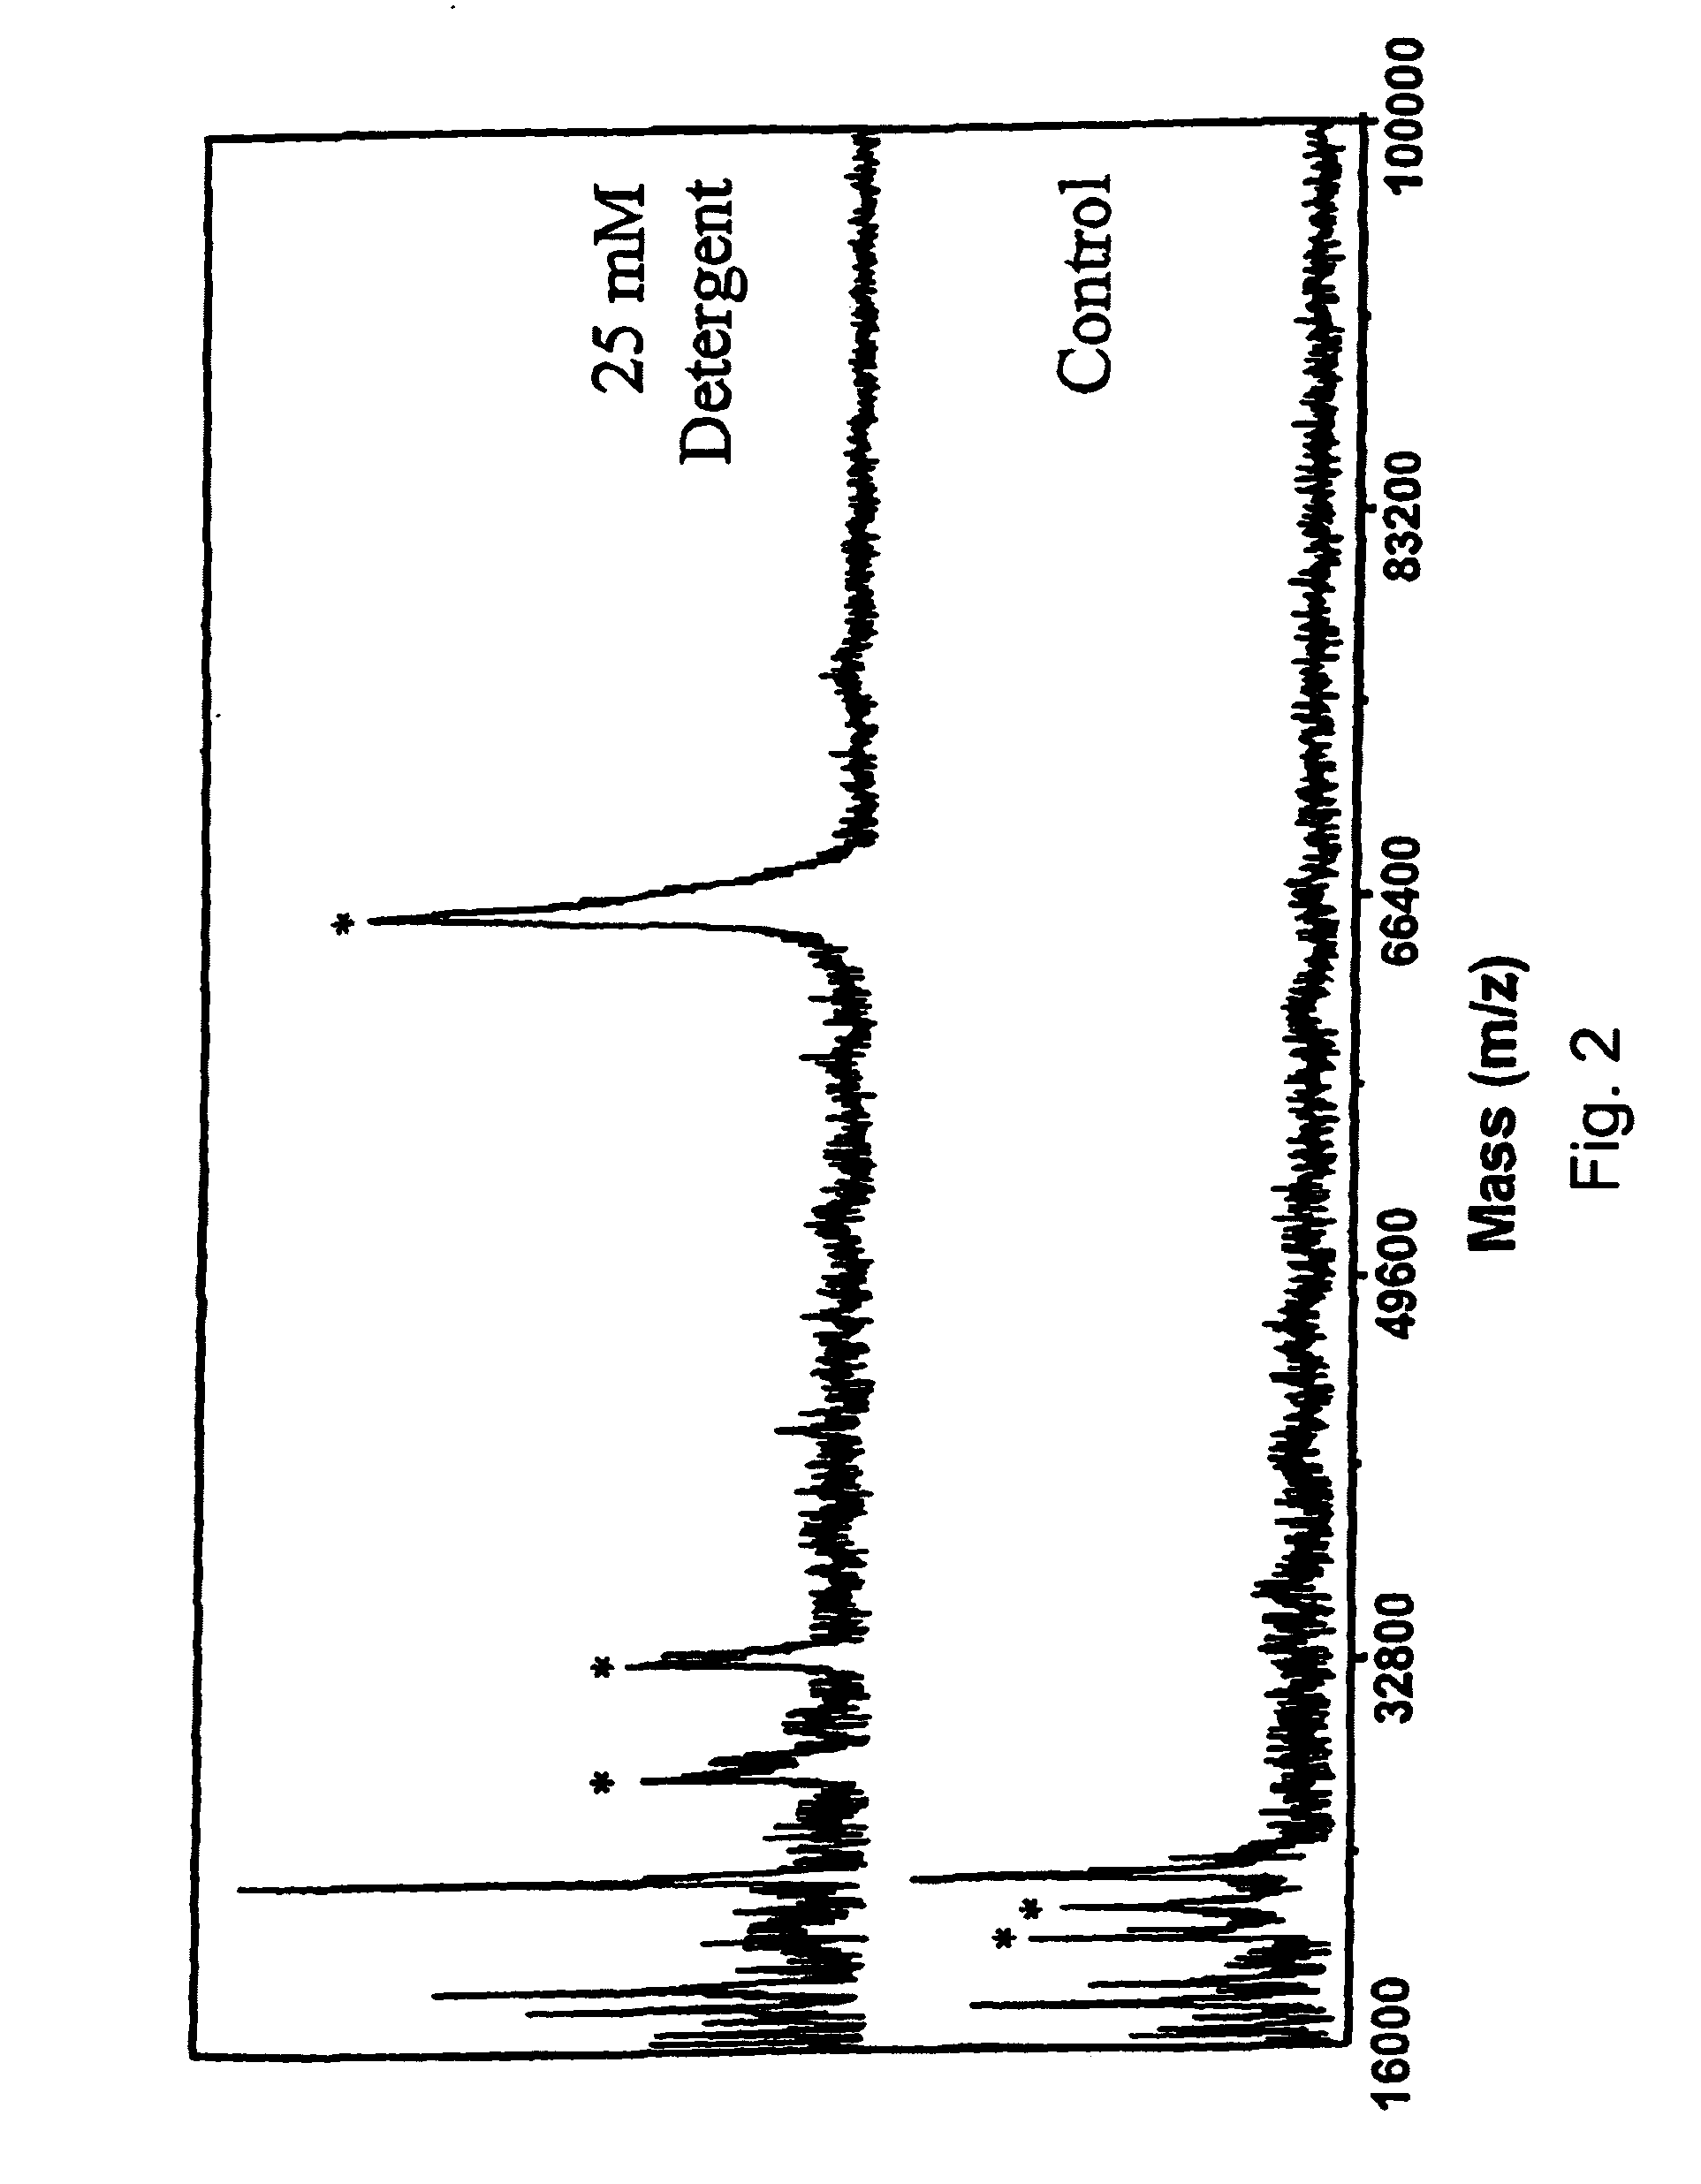 Cleavable surfactants and methods of use thereof